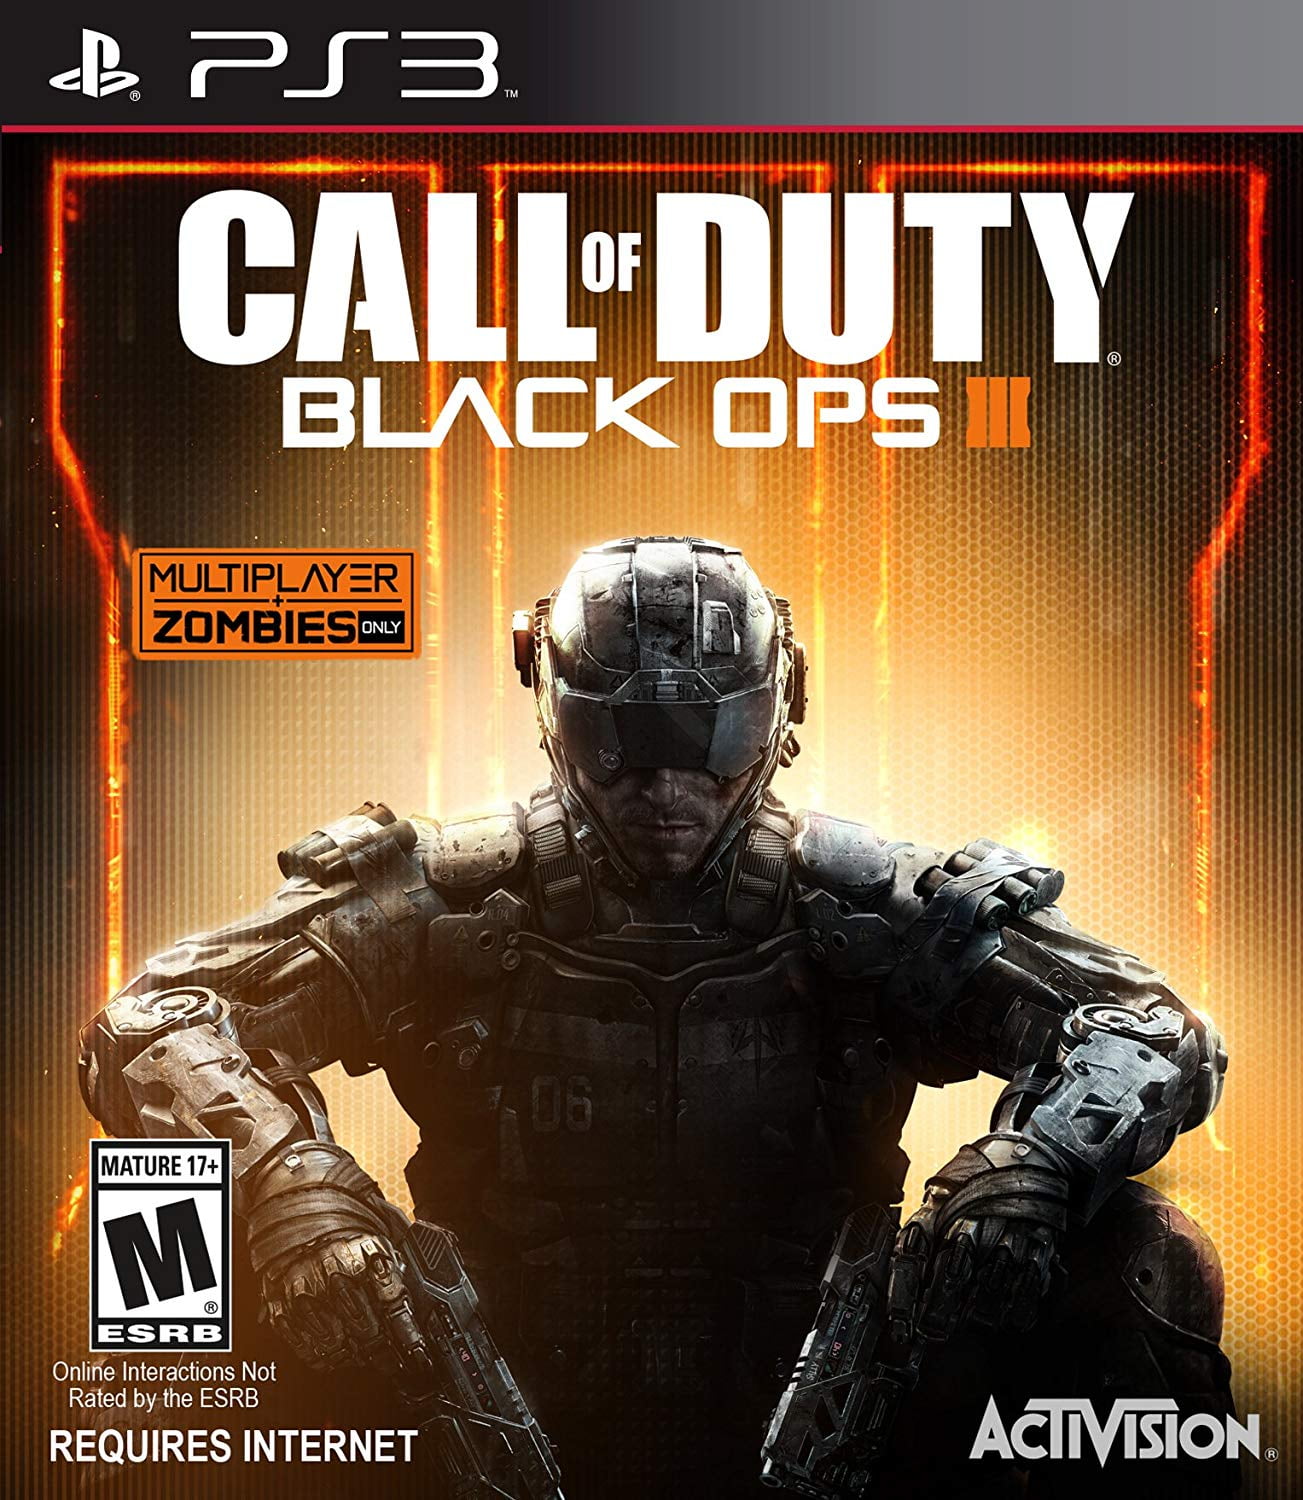 playstation 3 call of duty games